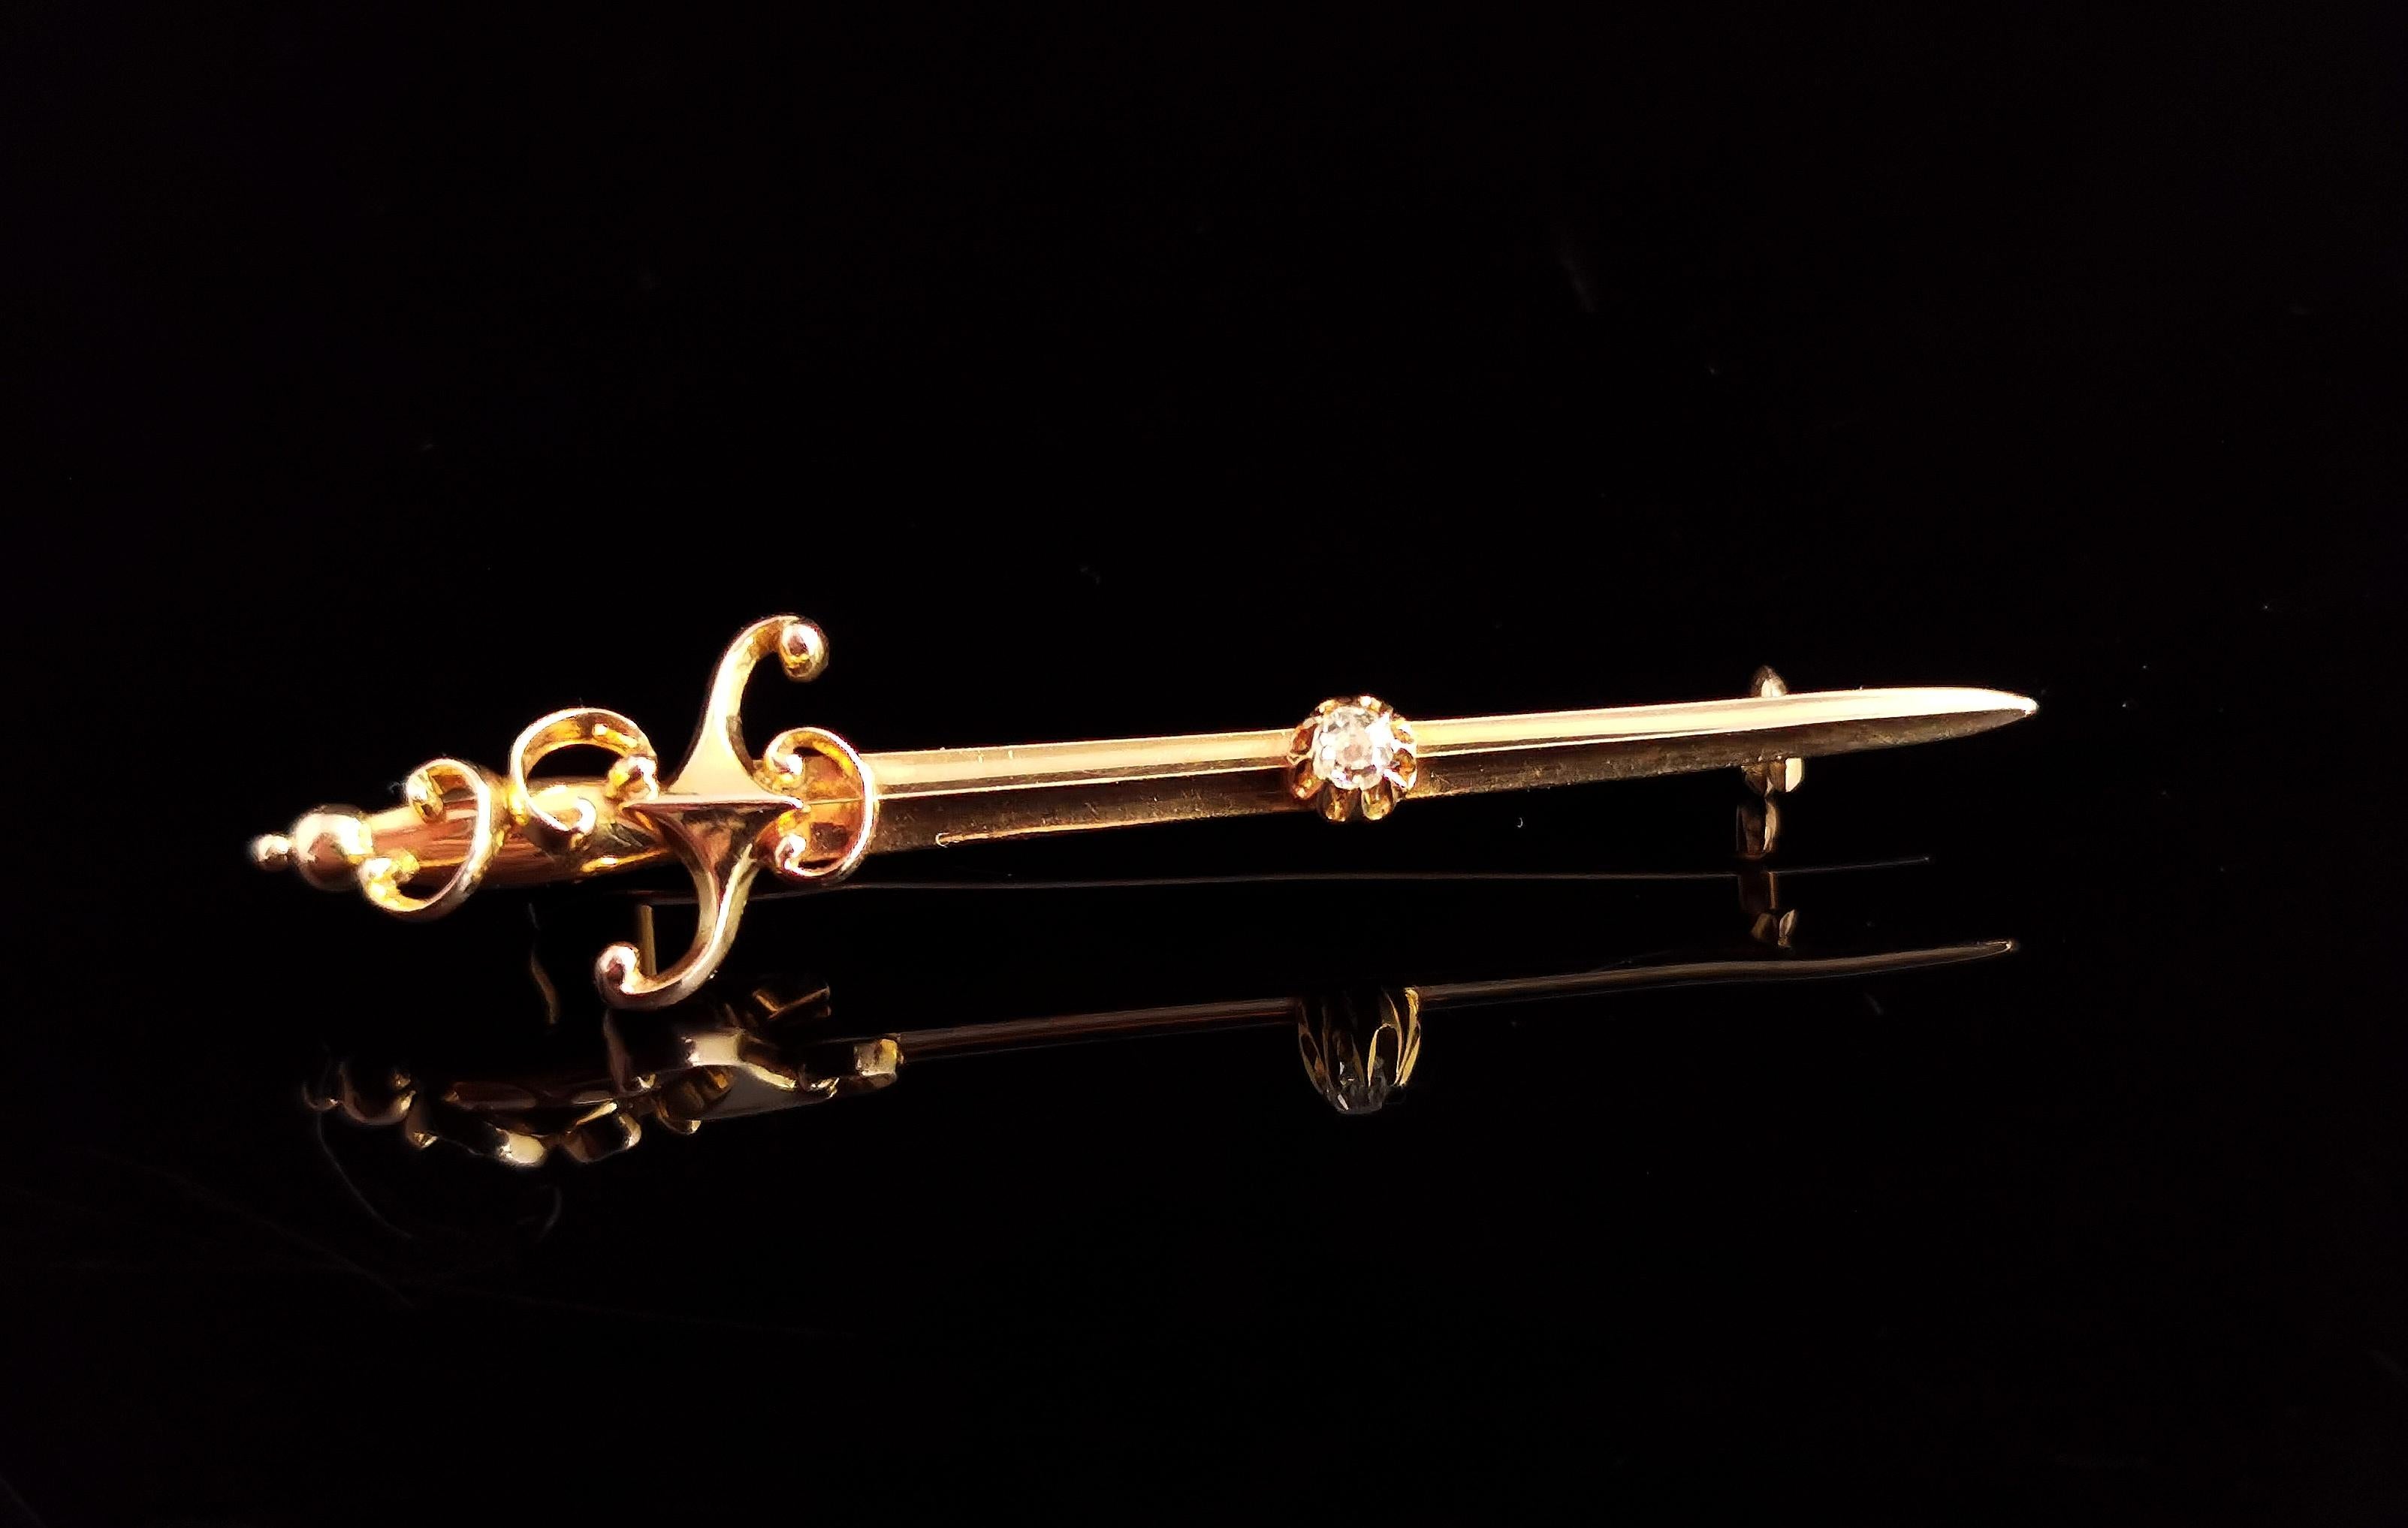 A magnificent fine antique, 9kt yellow gold diamond sword brooch.

A beautifully designed piece with the greatest attention to detail, well crafted from the scrolling hilt to the ridged blade.

It is made from rich 9kt yellow gold and is a solid